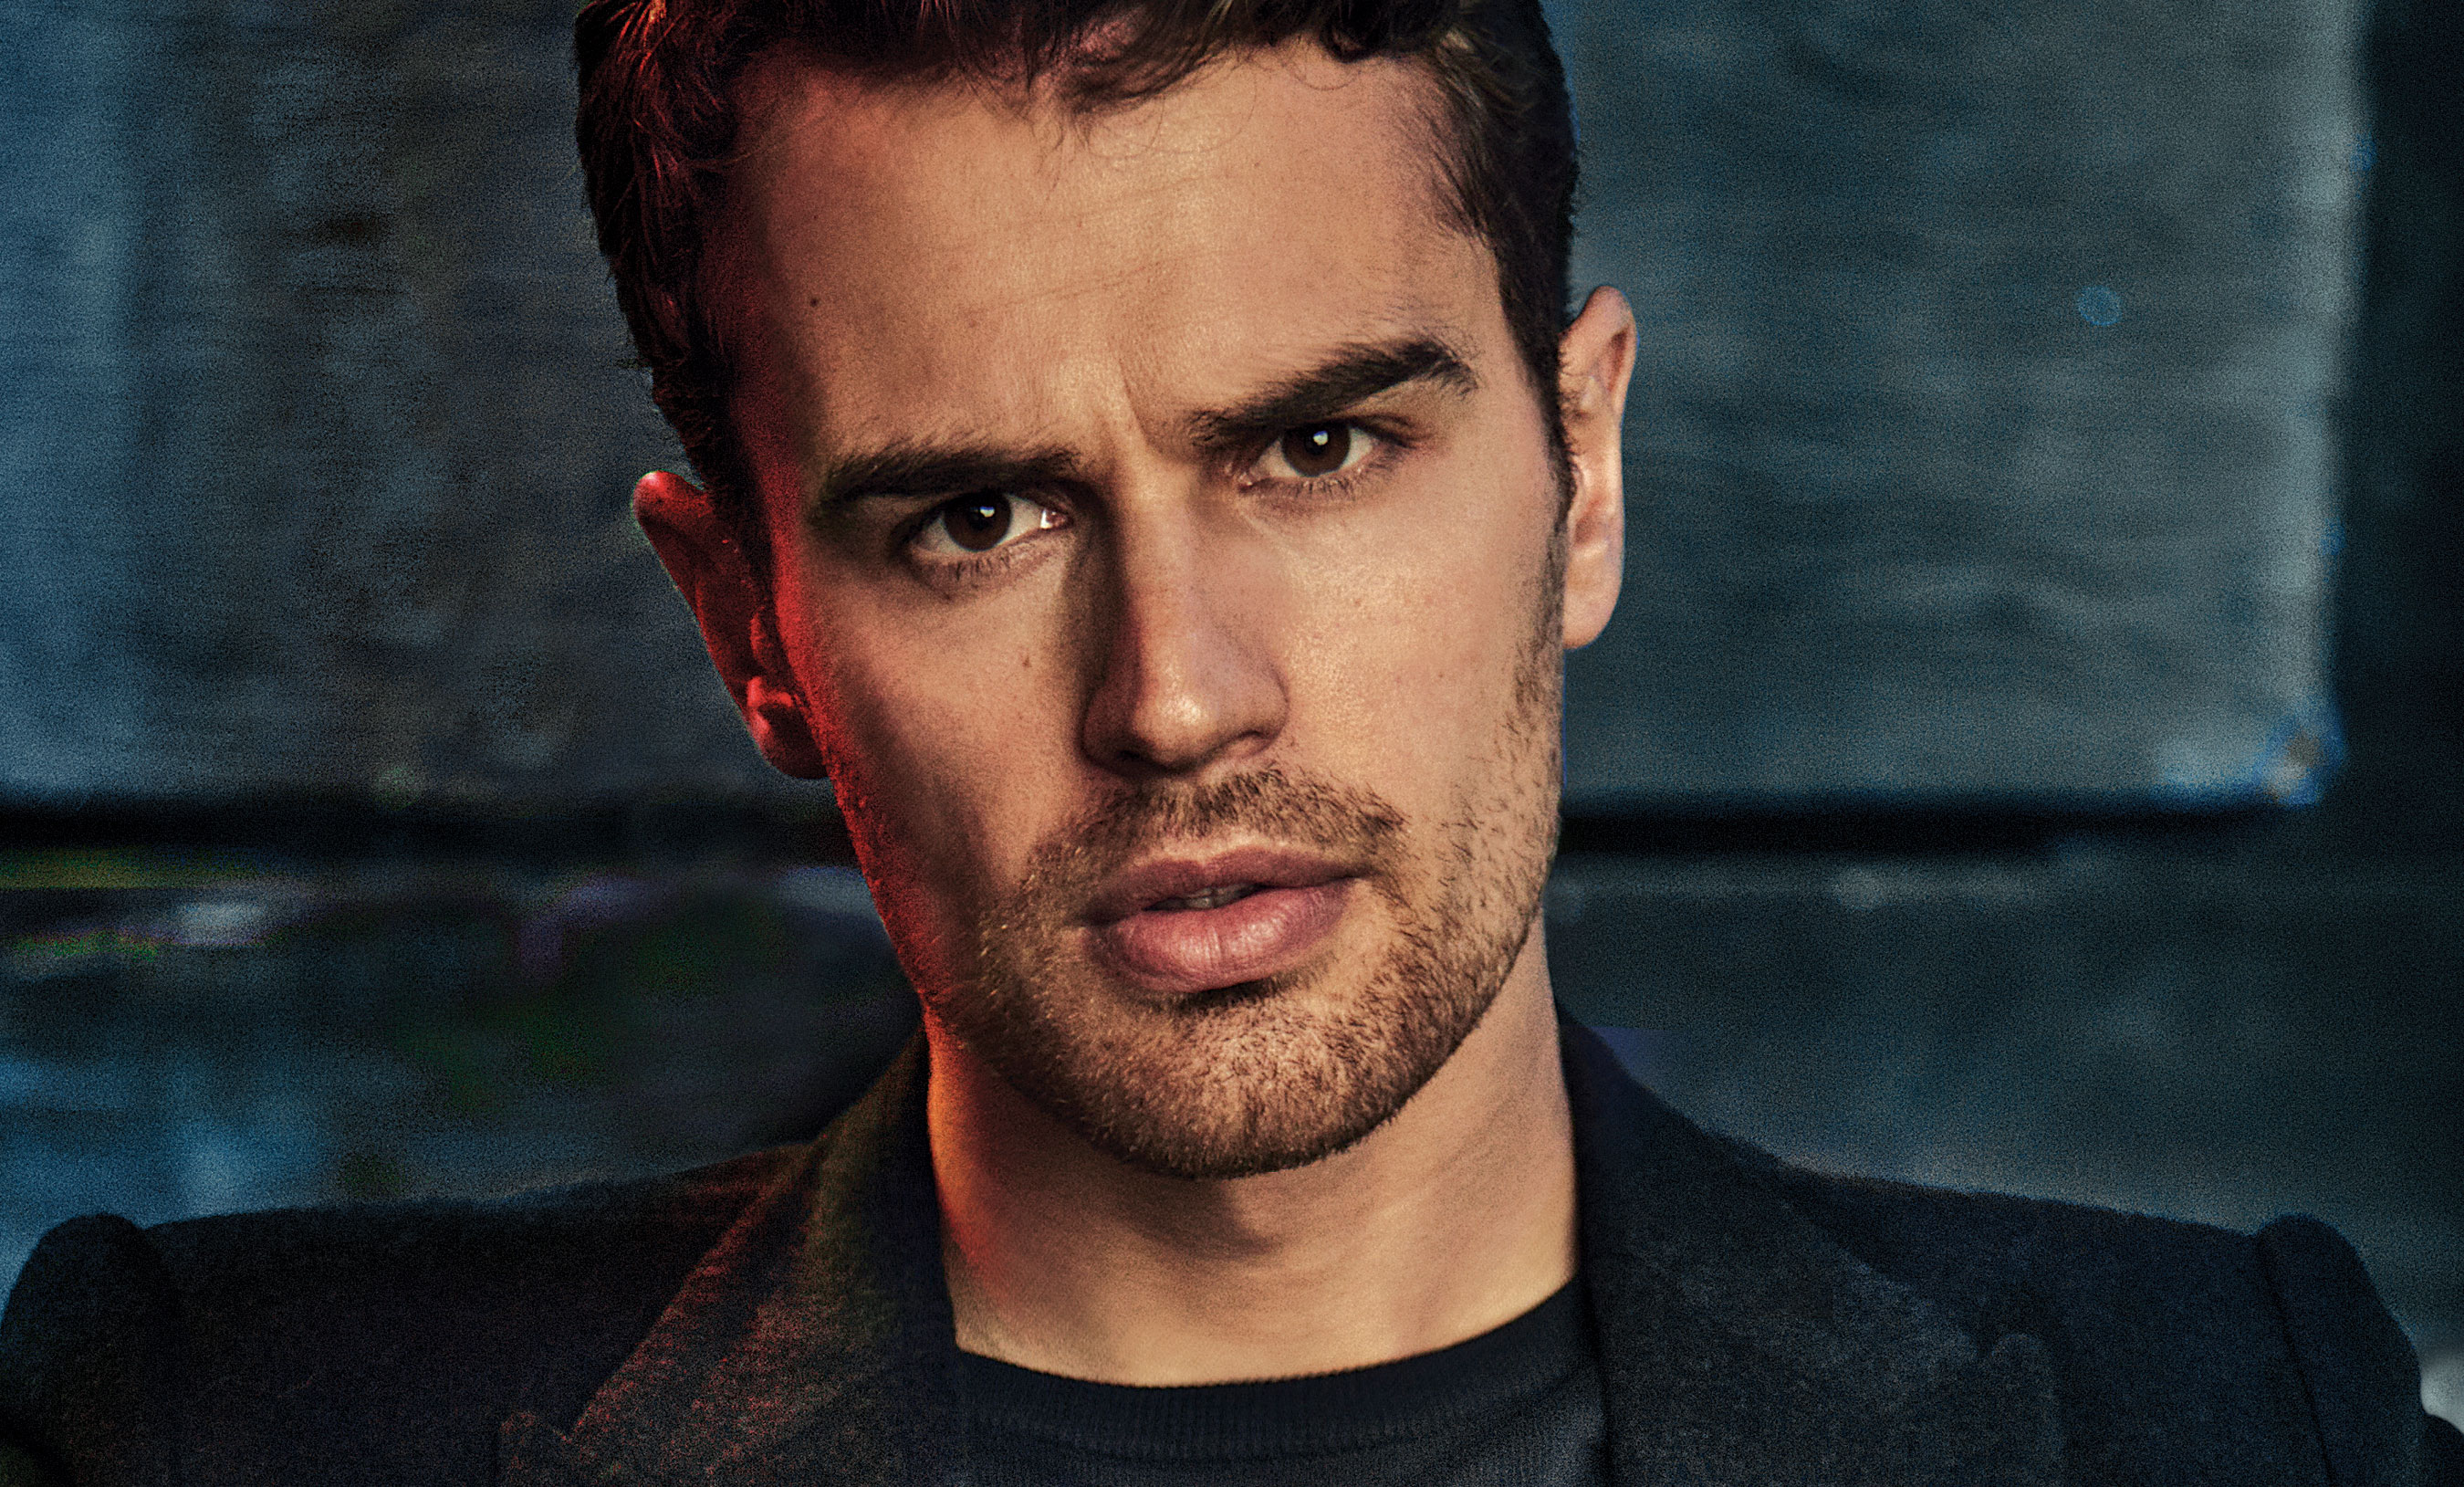 1024x1024 Theo James Actor Face 1024x1024 Resolution Wallpaper Hd Man 4k Wallpapers Images